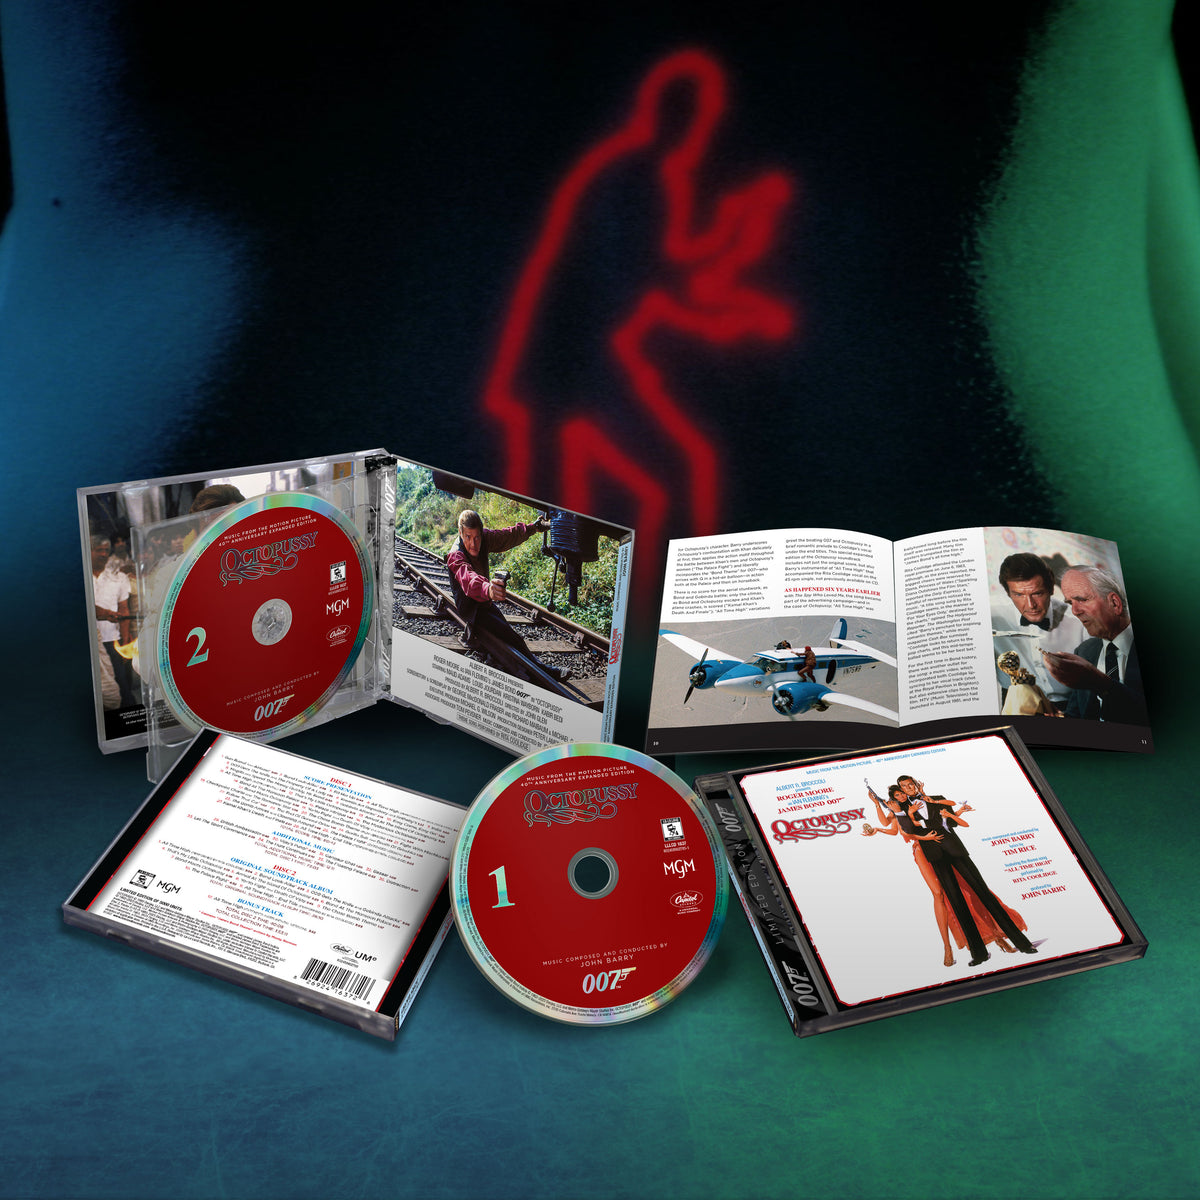 James Bond Octopussy Soundtrack Double CD Set - 40th Anniversary Expanded Remastered Edition (Pre-order)